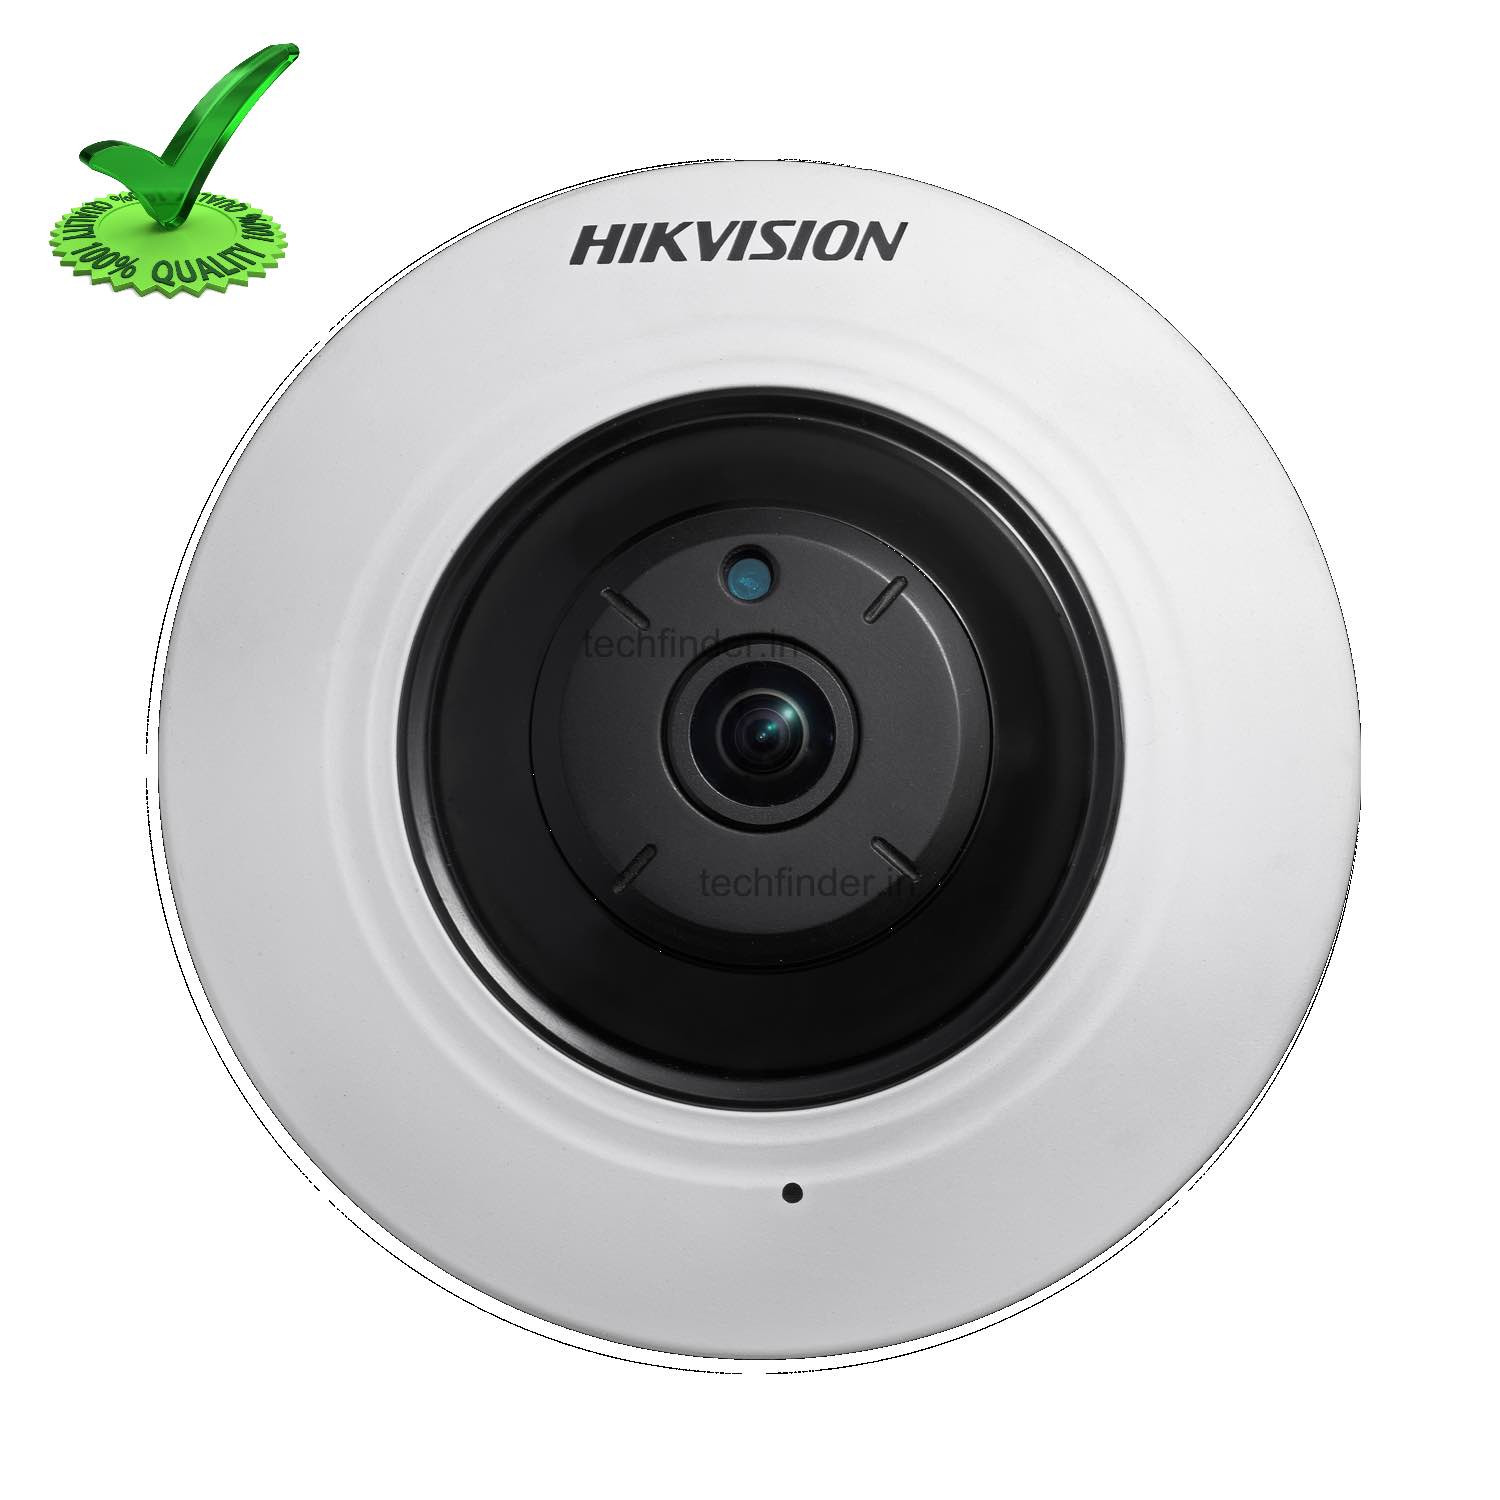 Hikvision DS-2CD2935FWD-I 3MP IP Network Fisheye Camera